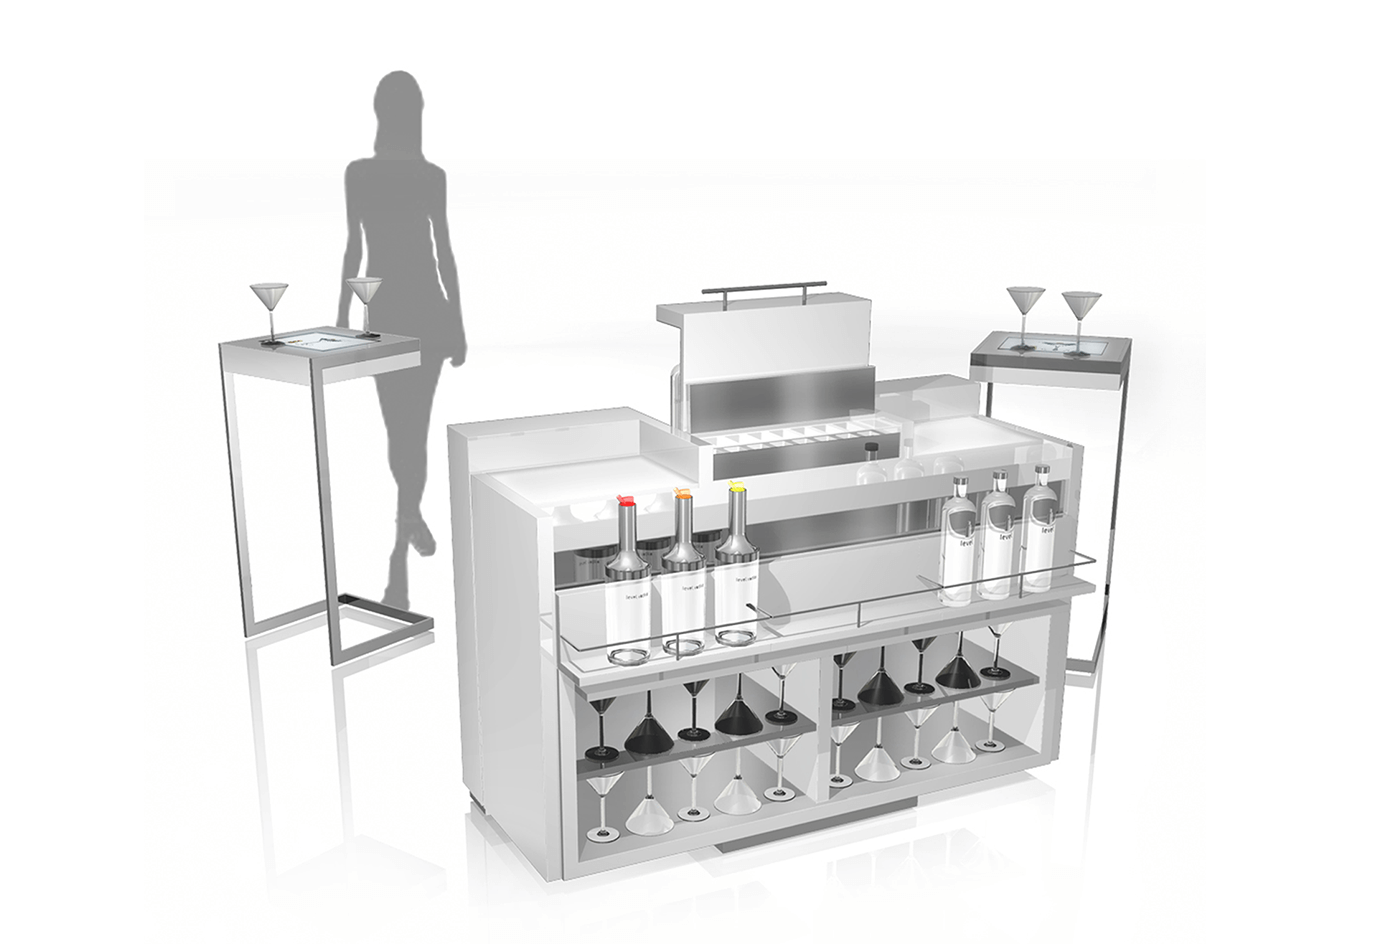 Level mobile bar - rear view open